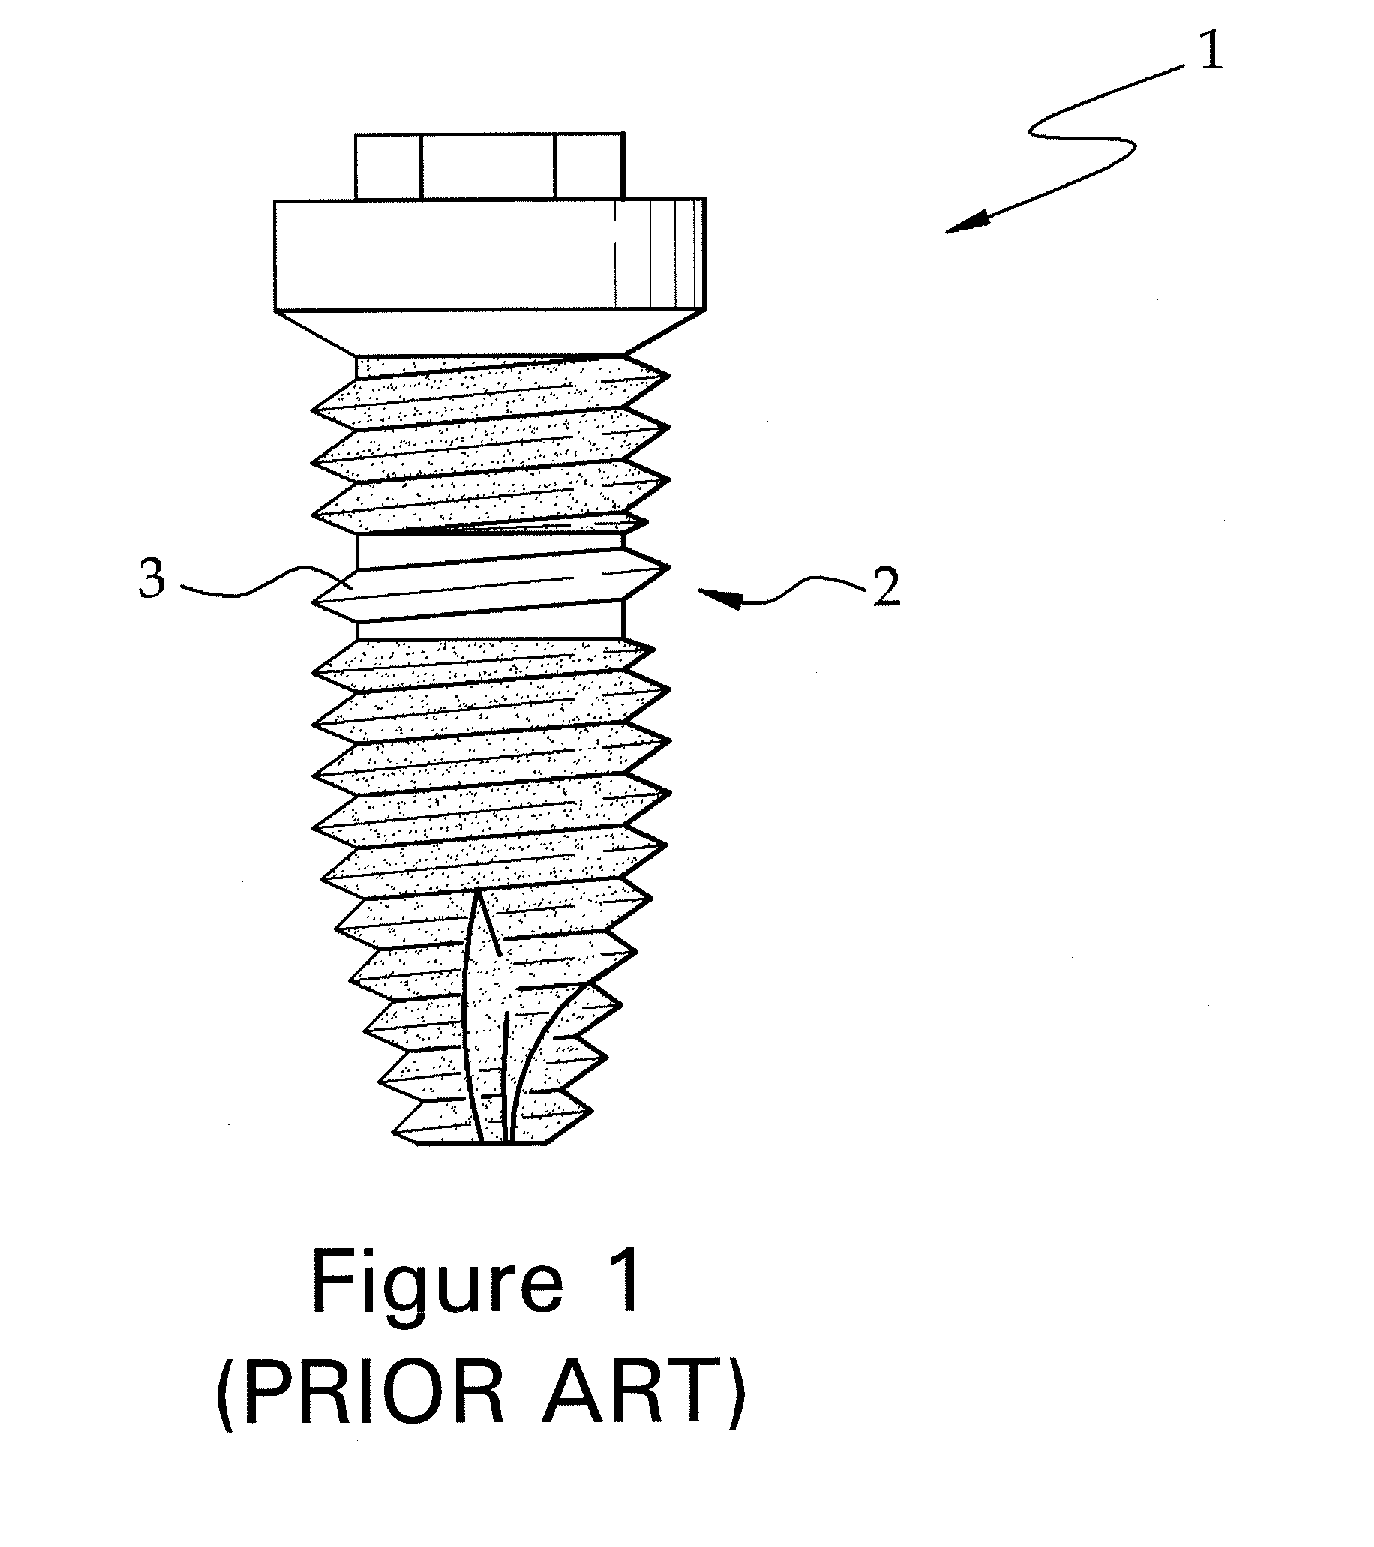 Fixture of dental implant and method of manufacturing the same